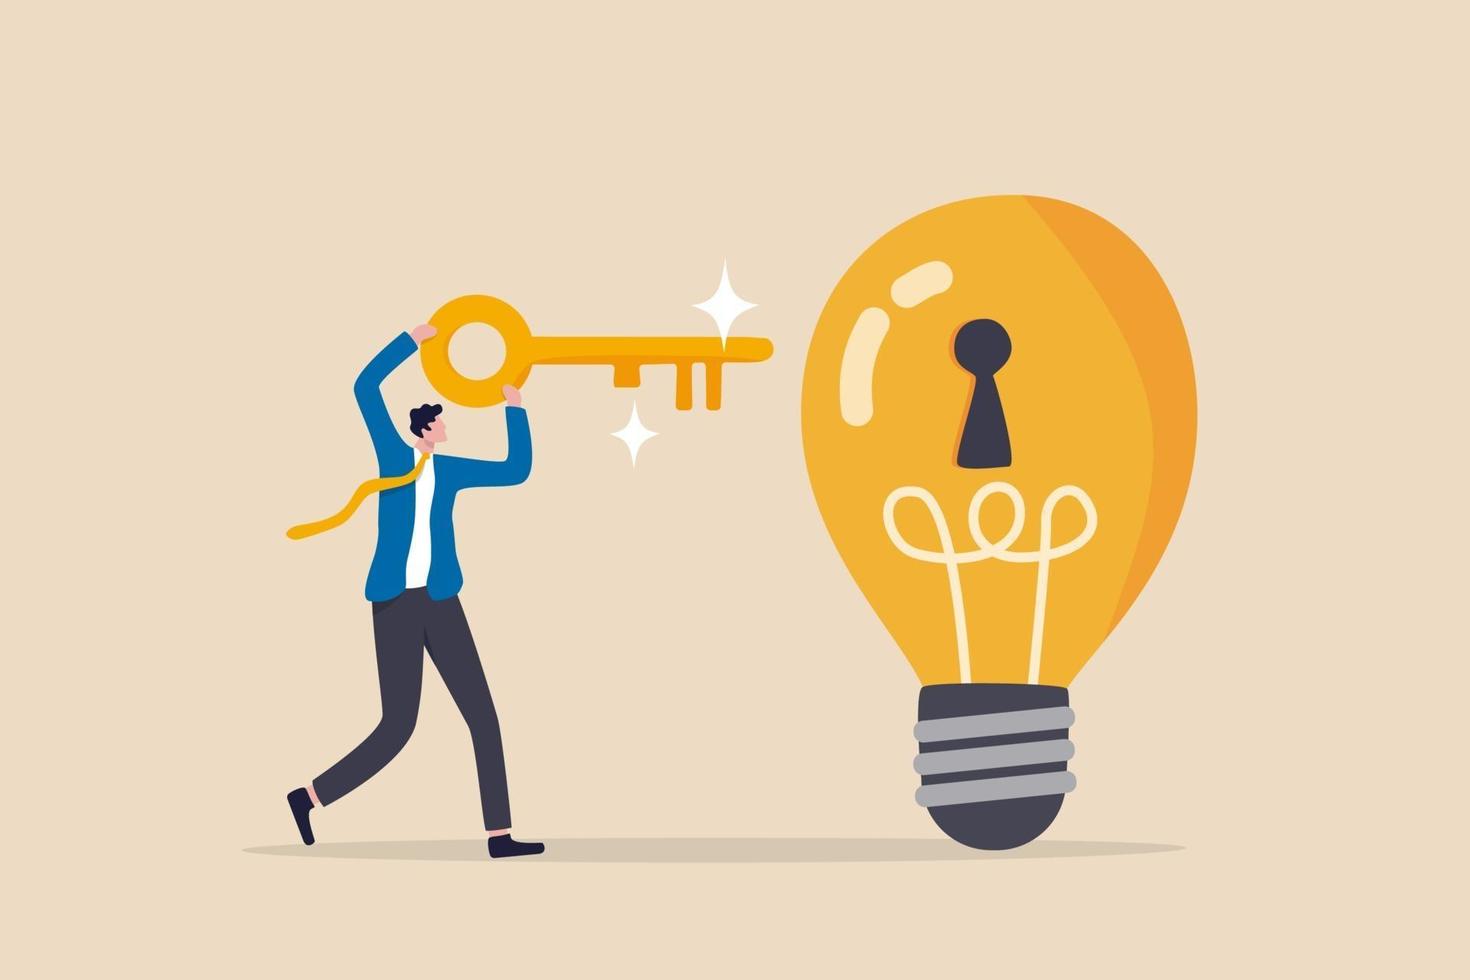 Unlock new business idea, invent new product or creativity concept, smart businessman holding golden key about to insert into key hold on lightbulb idea lamp. vector